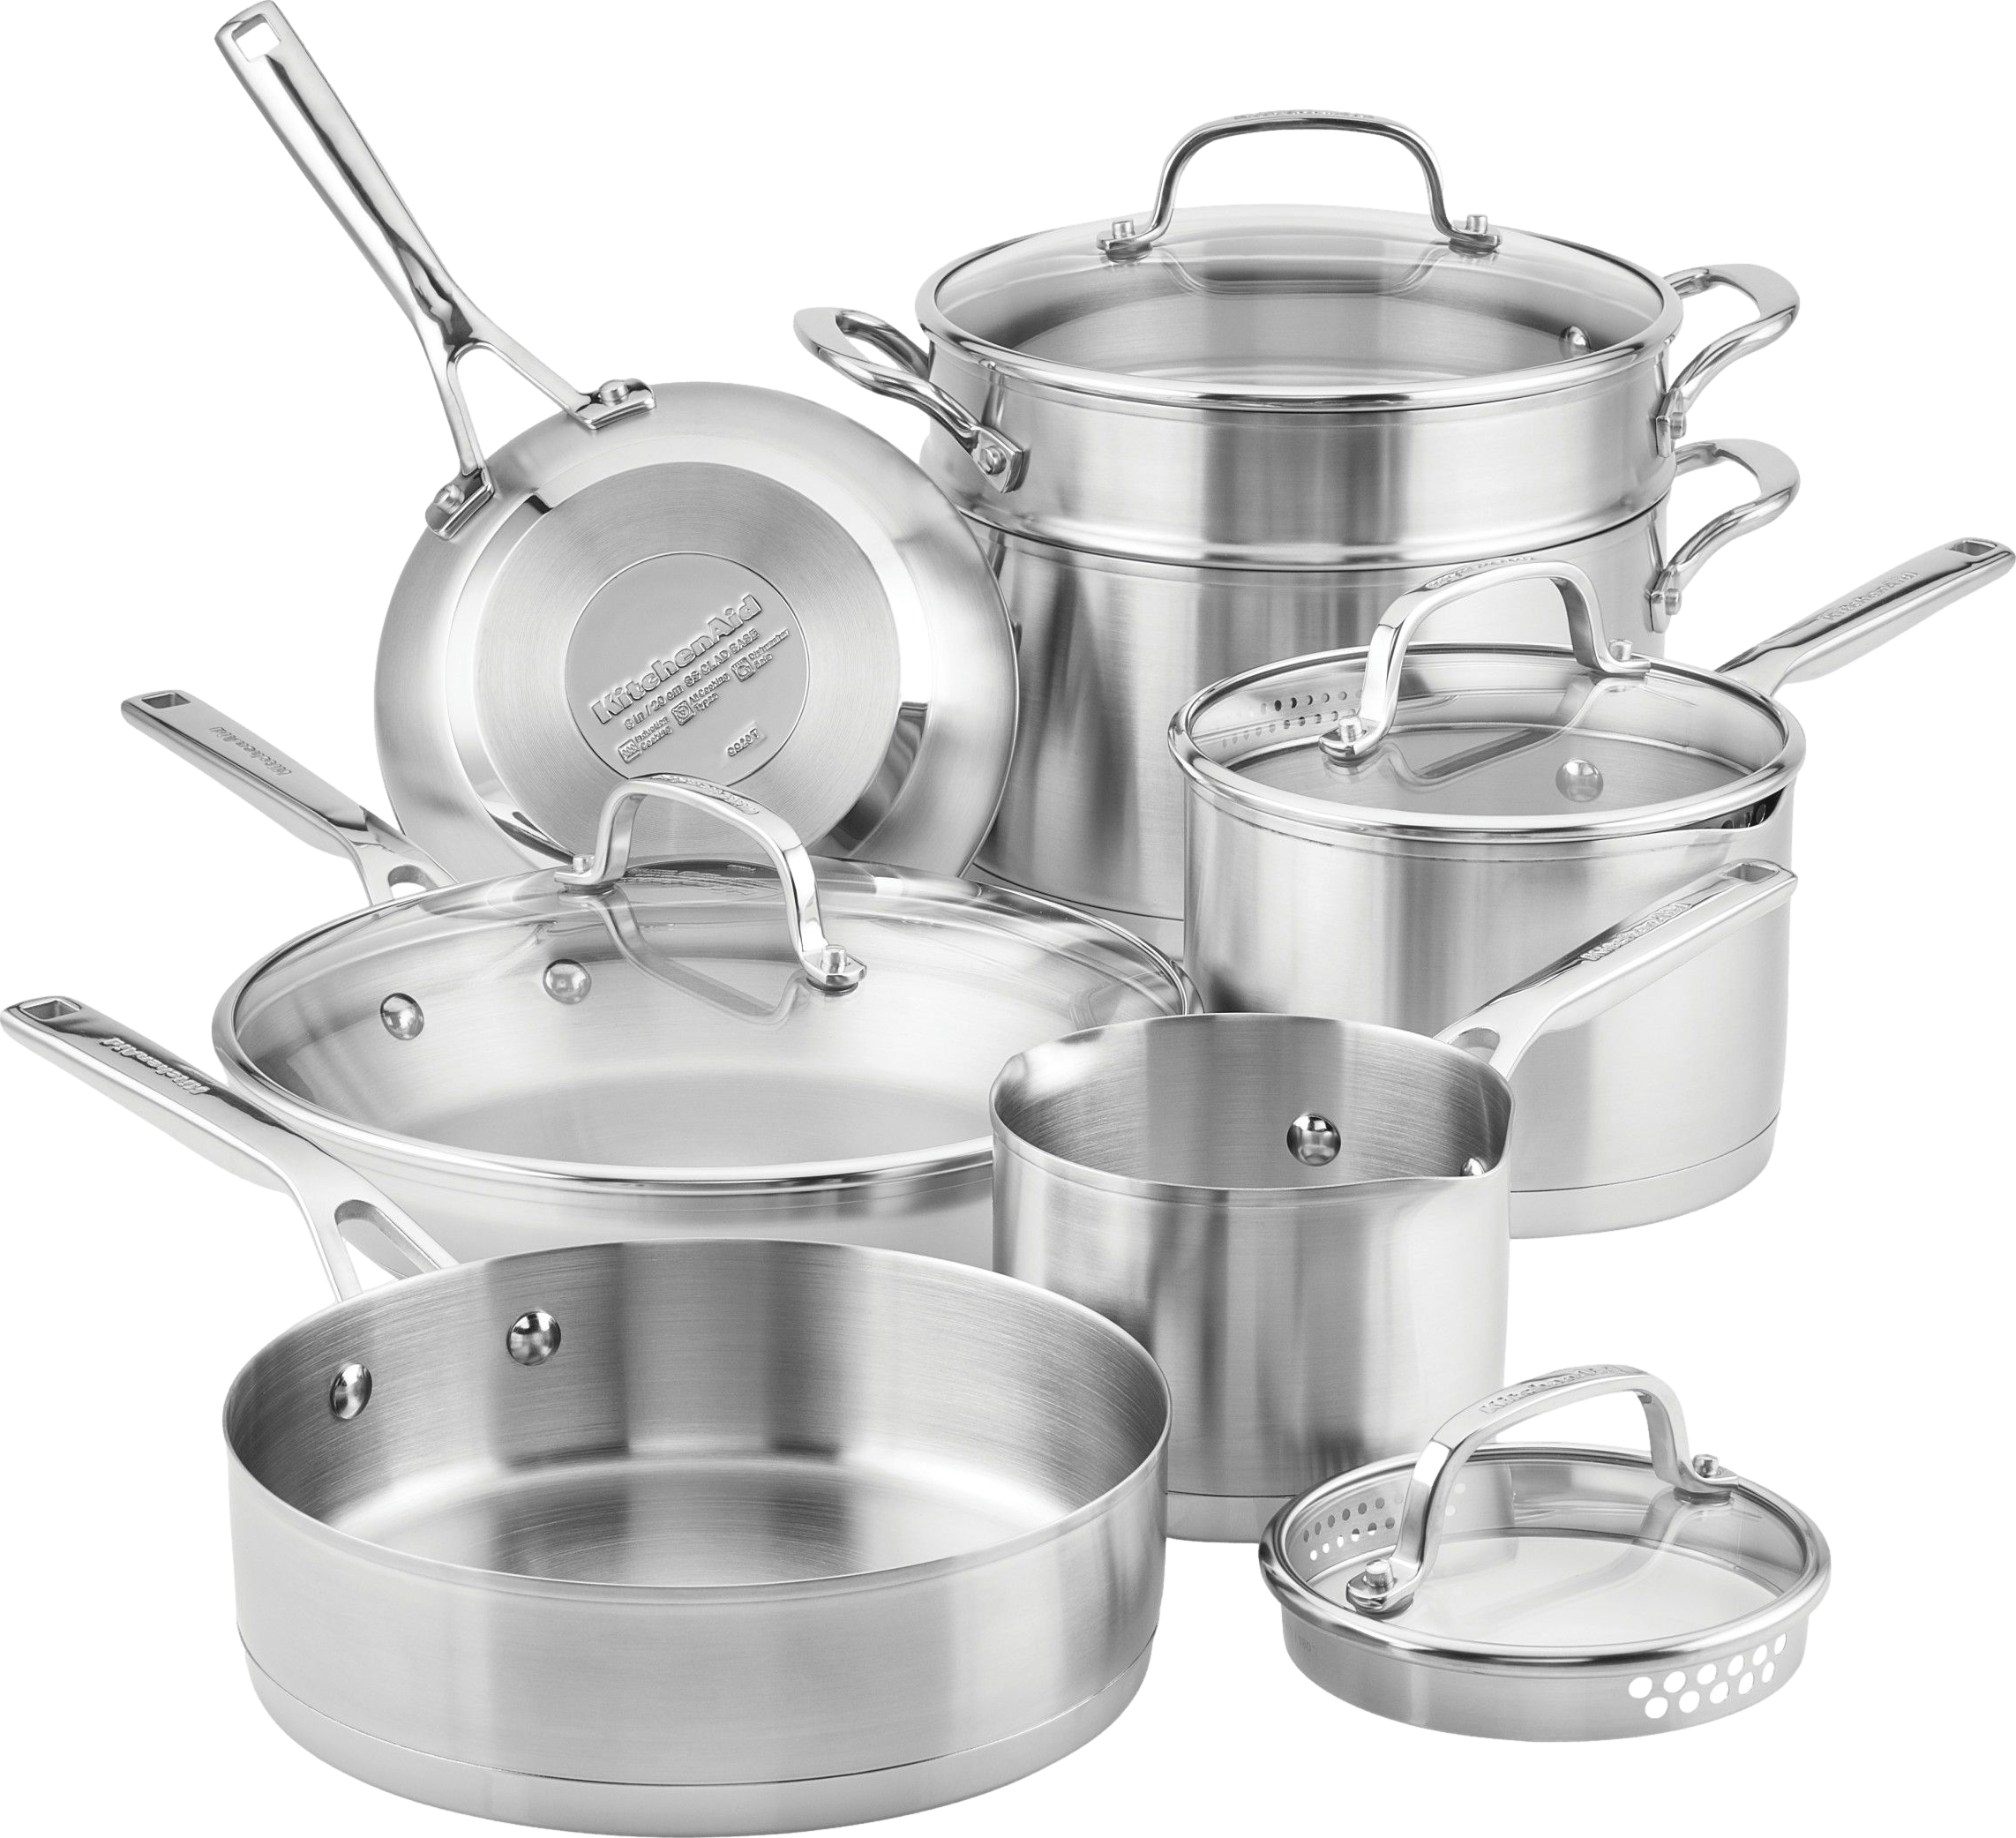 KitchenAid Stainless Steel Cookware Pots and Pans Set, 10 Piece, Brushed  Stainless Steel